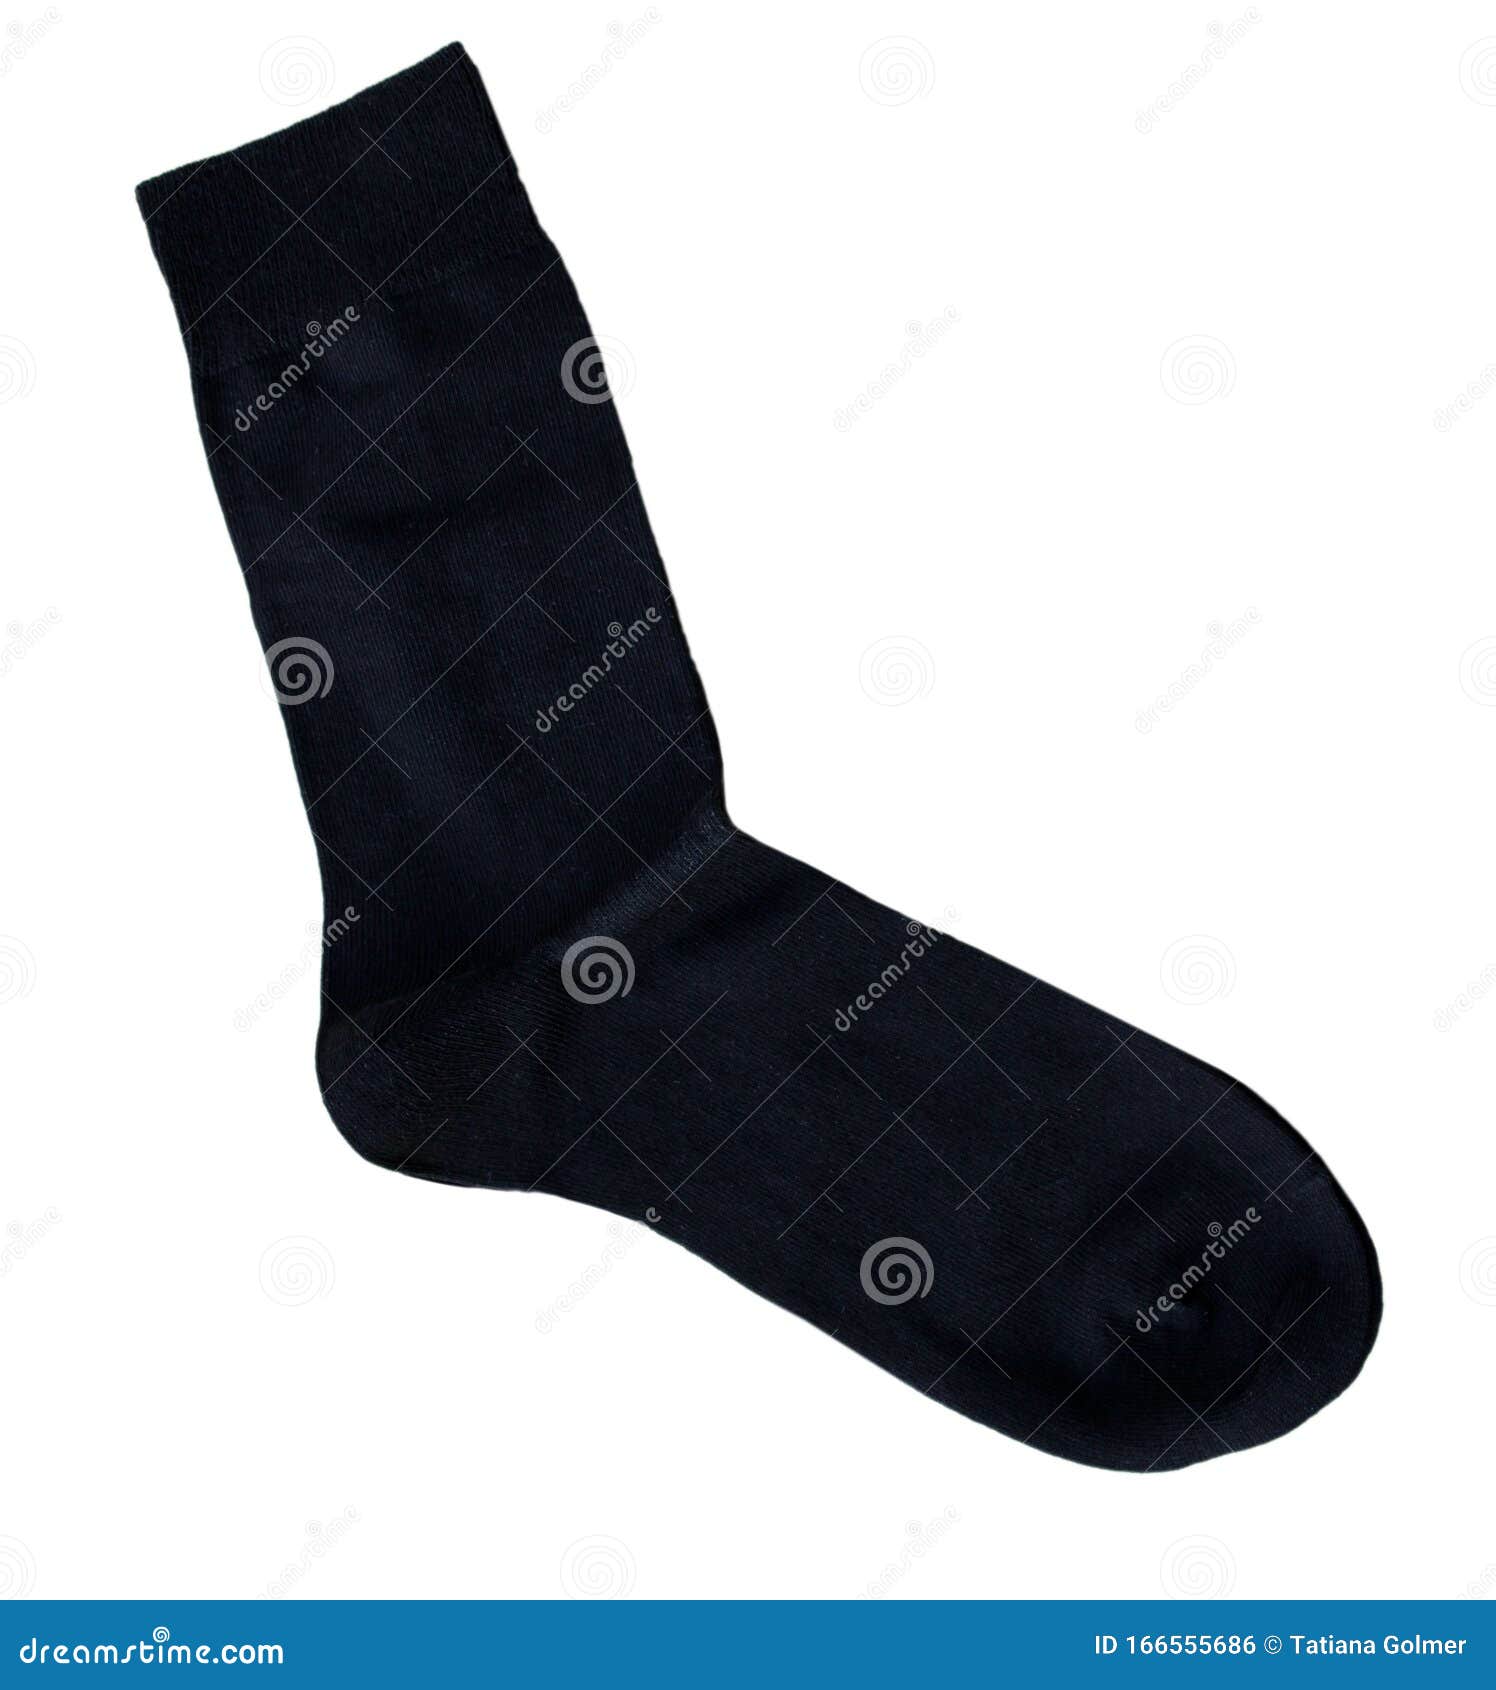 Thin Black Men`s Cotton Socks, Concept Fashion and Style, Isolate on a ...